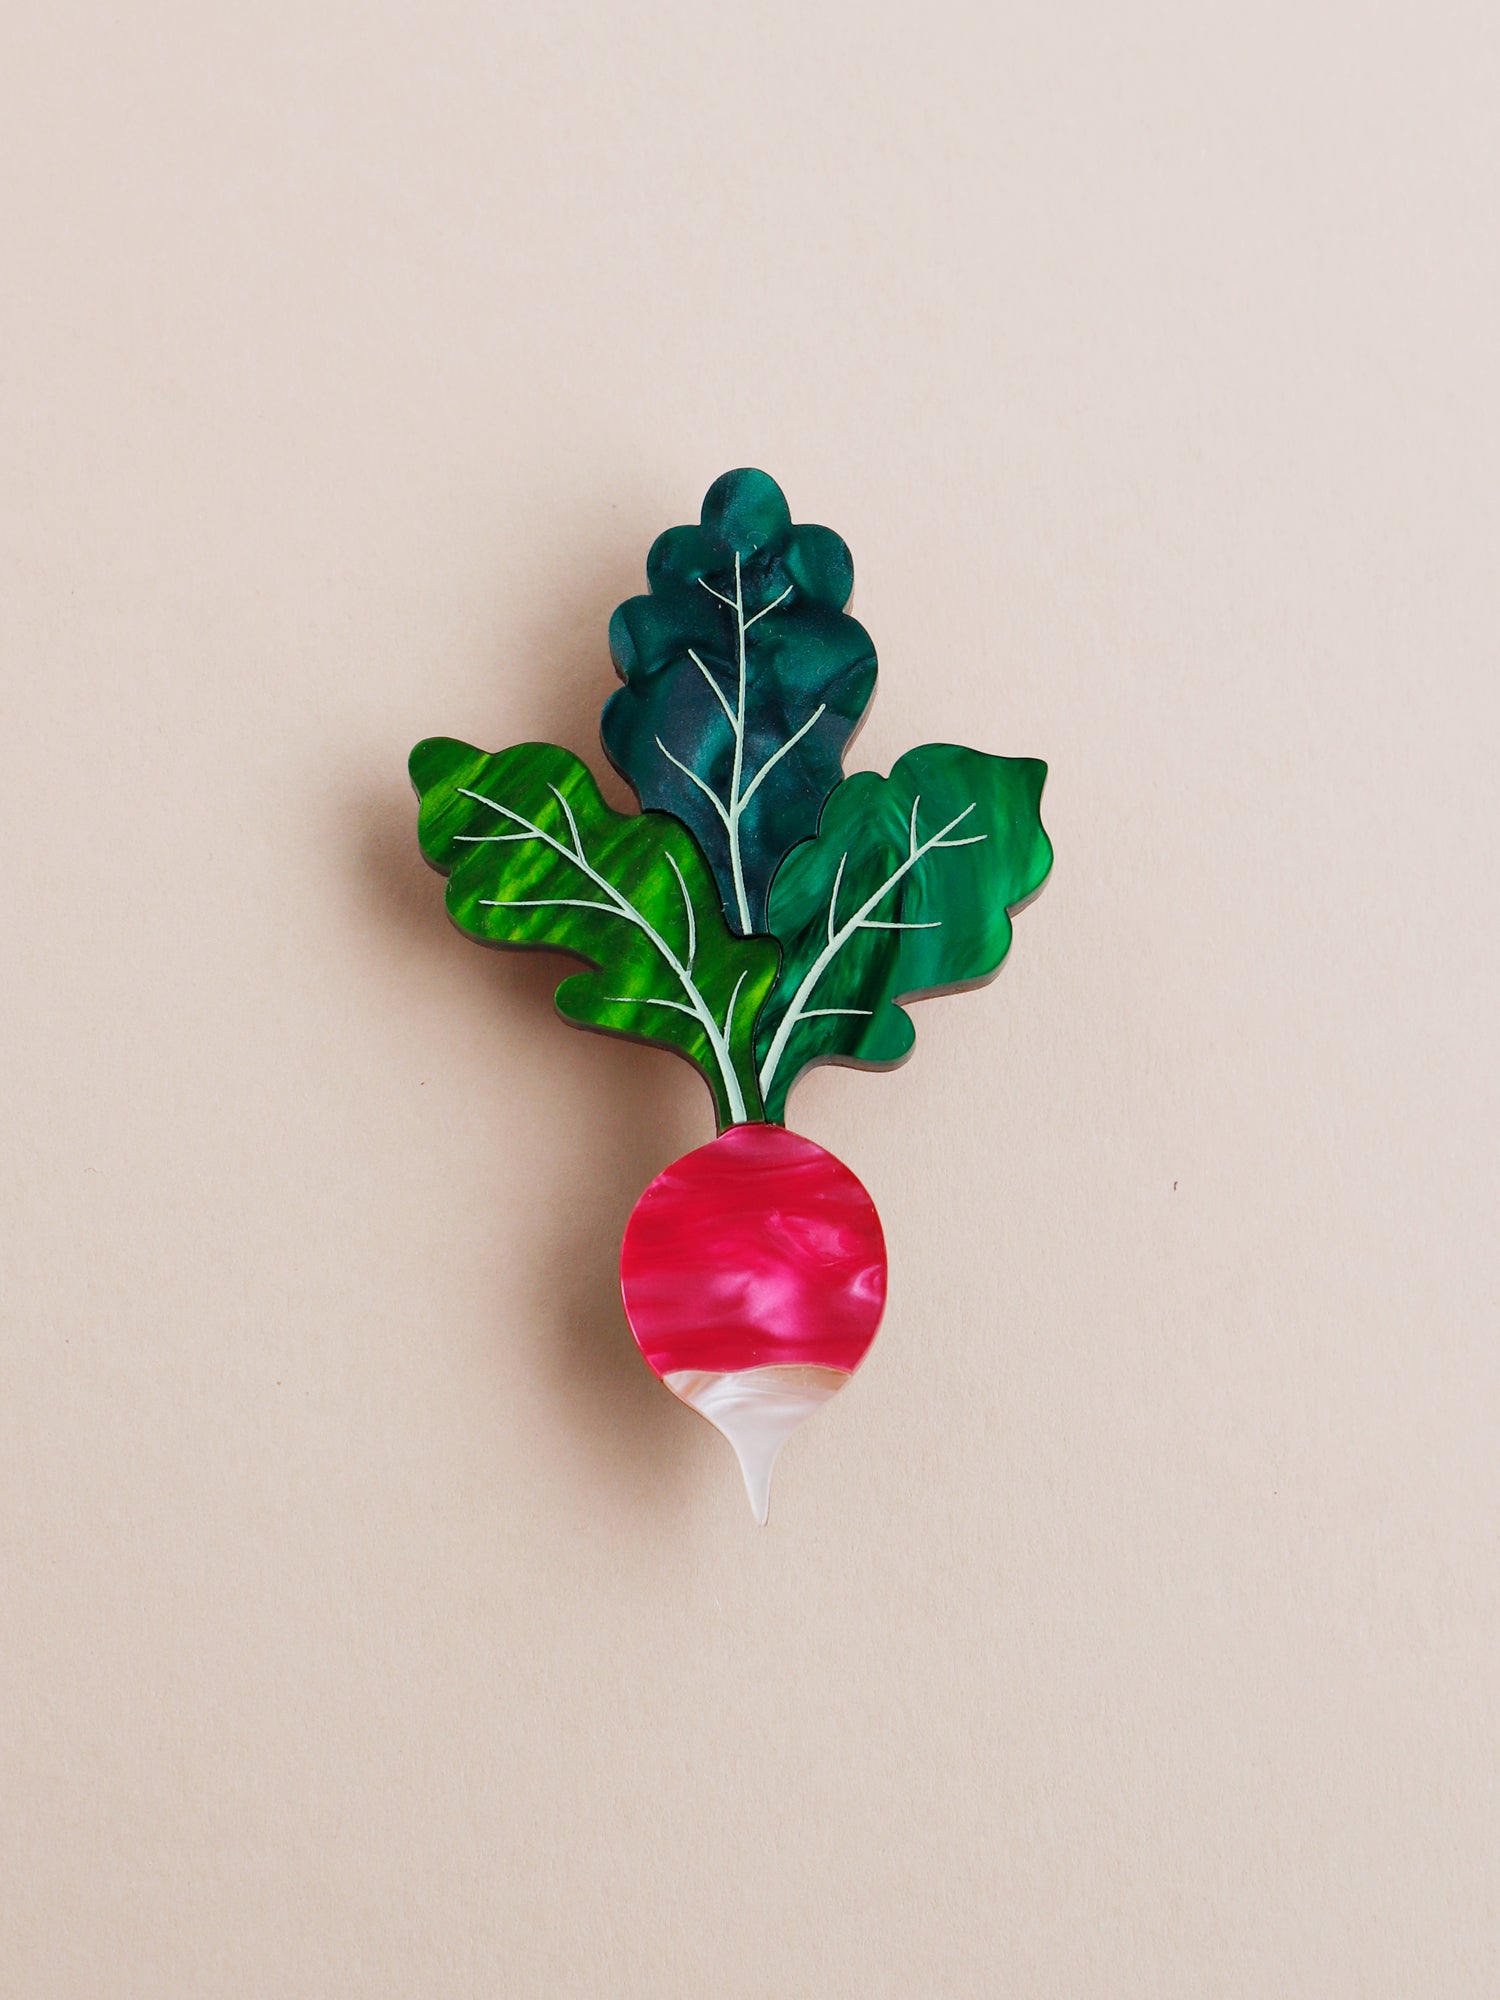 Pink and green statement acrylic radish brooch. Handmade in London by Wolf & Moon.